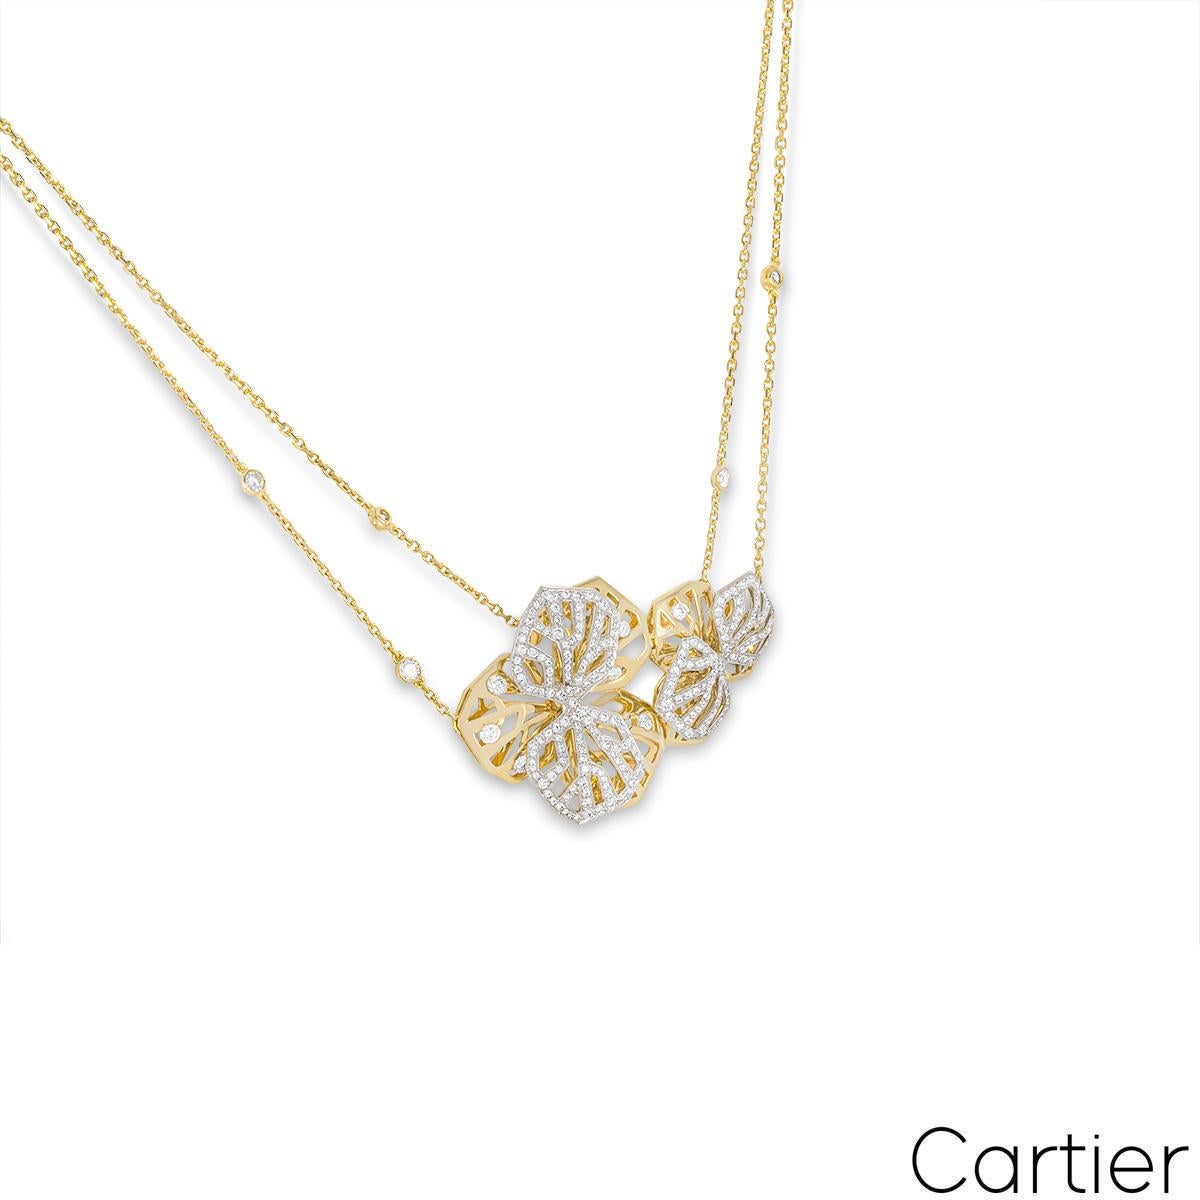 A magnificent 18k yellow and white gold diamond necklace by Cartier from the Caresse d’Orchidées collection. The necklace features two diamond set openwork orchid motifs centred on a double chain with 5 bezel set diamond stations. Set throughout the